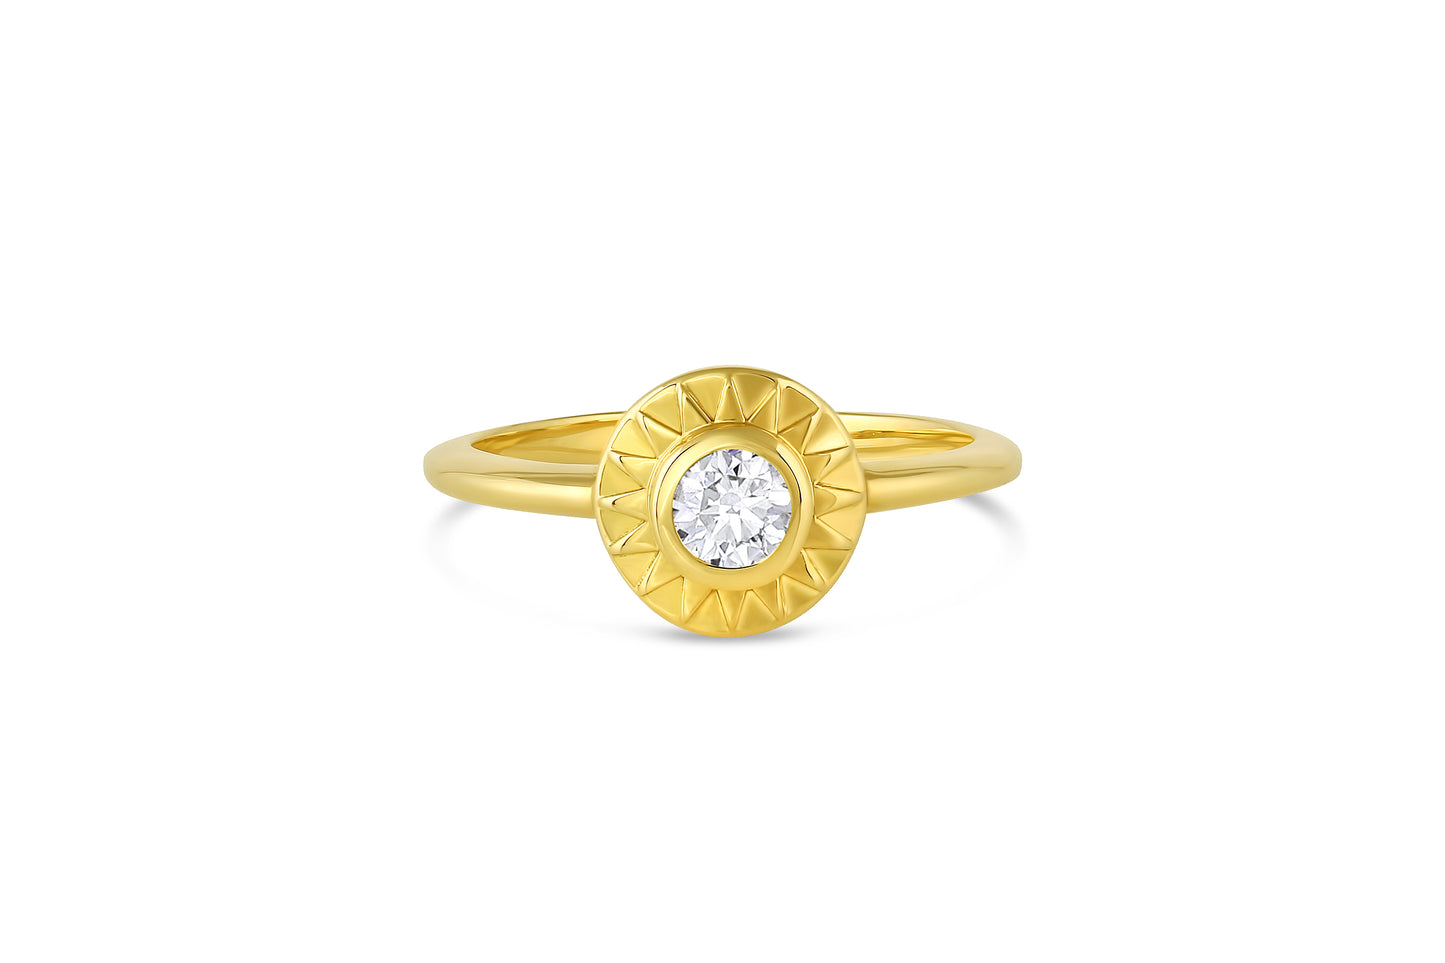 Load image into Gallery viewer, 18k yellow gold sunburst circle ring with diamond center stone on white background.
